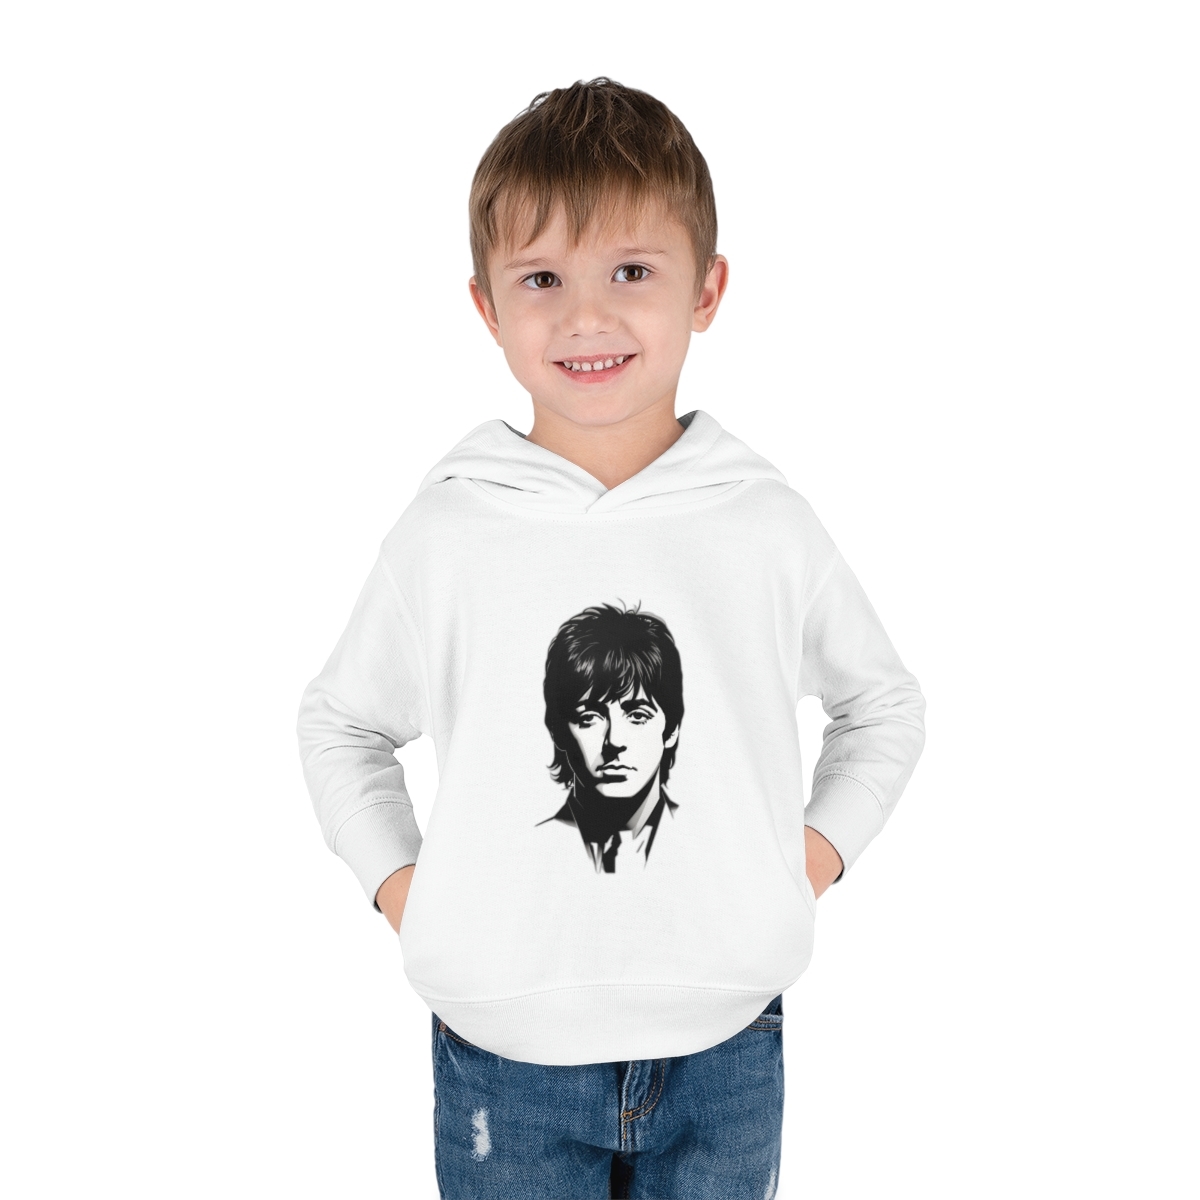 Primary image for Toddler Pullover Fleece Hoodie Black with Paul Mccartney Beatles Portrait